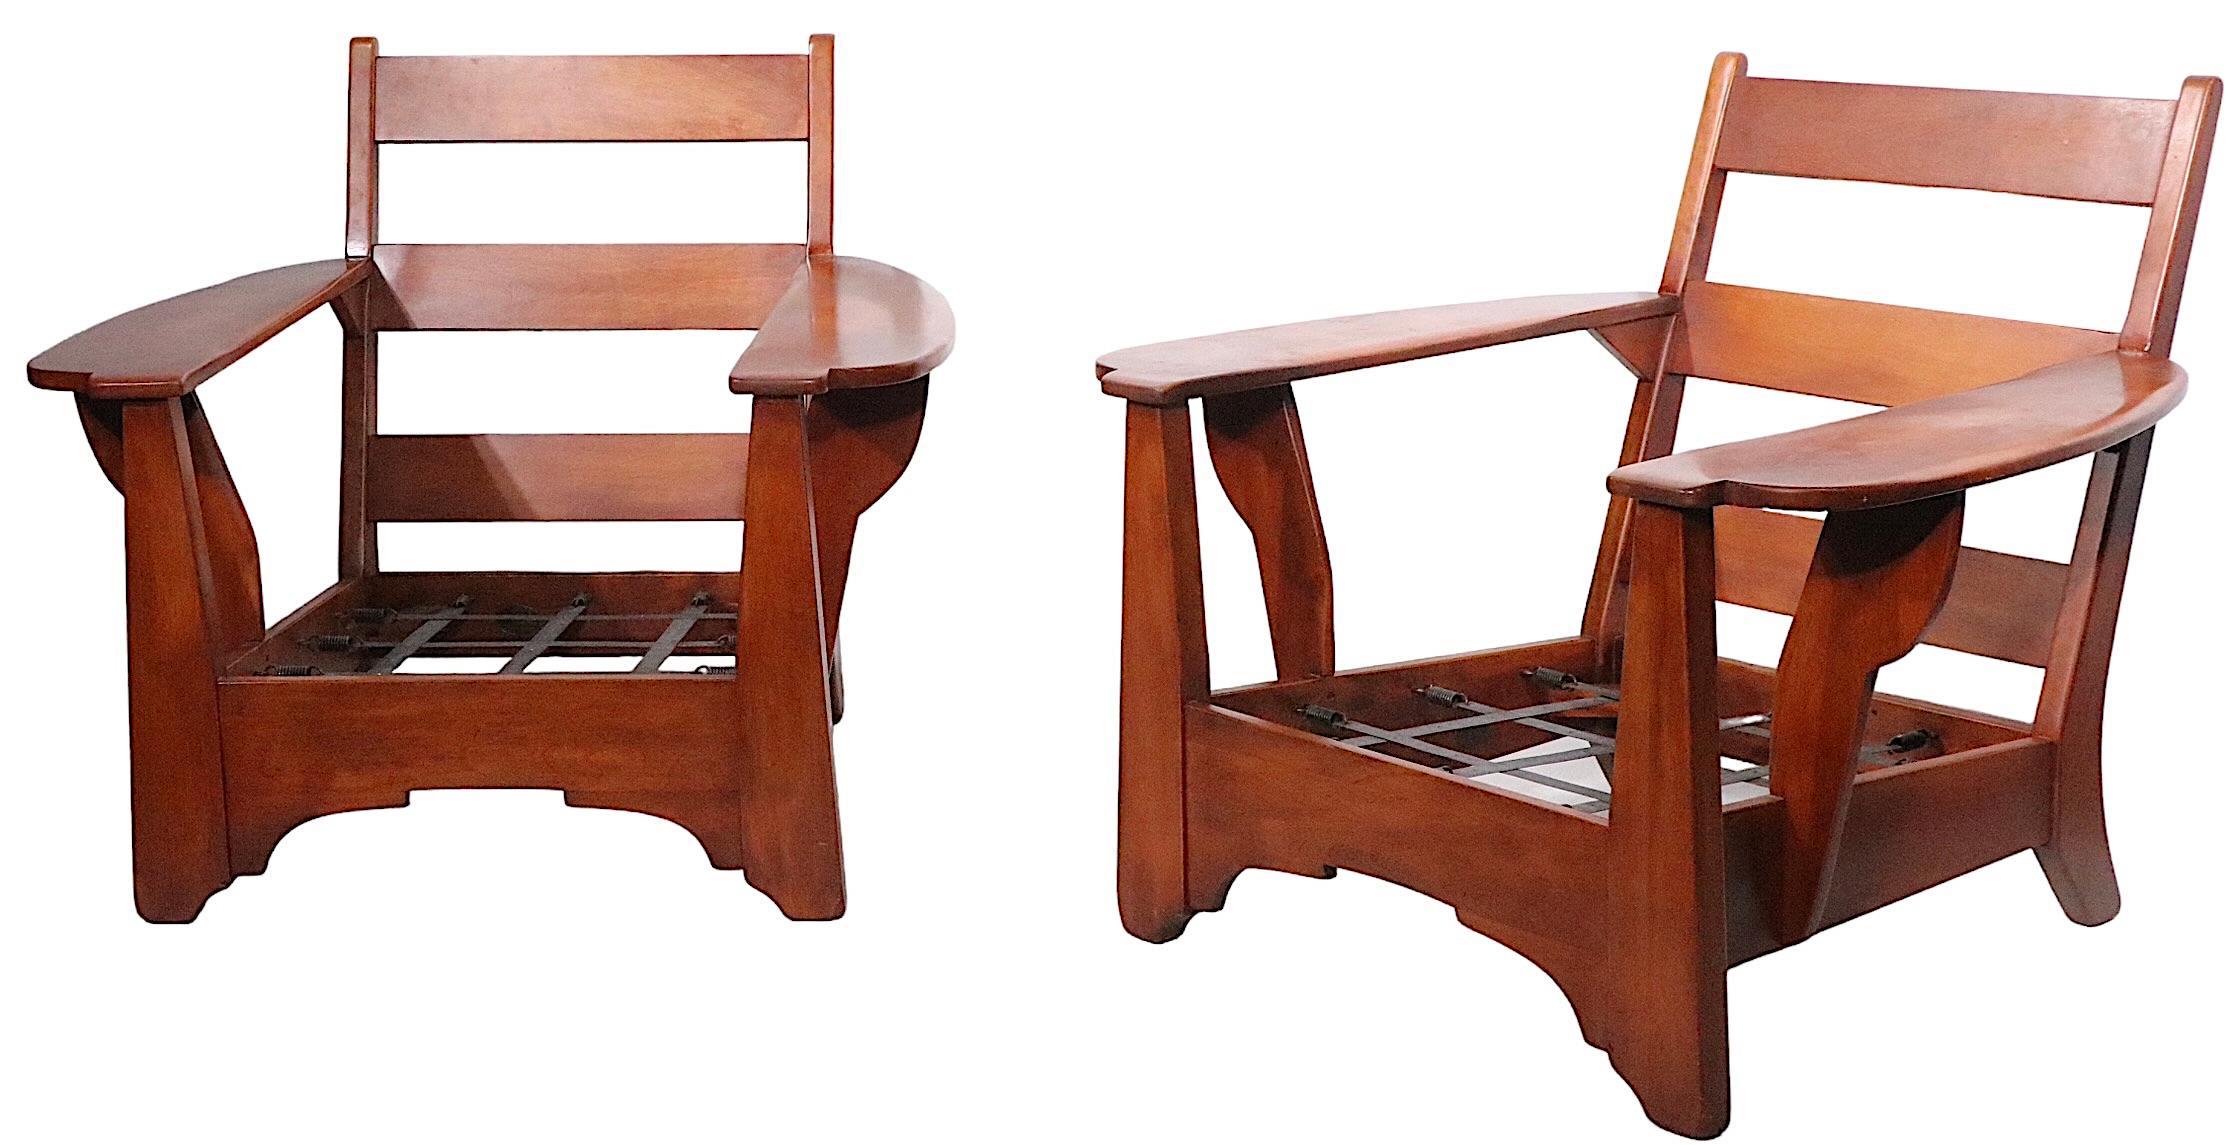 Pr. Paddle Arm Lounge Chairs by Herman de Vries for Cushman Colonial, c 1940-50s 4